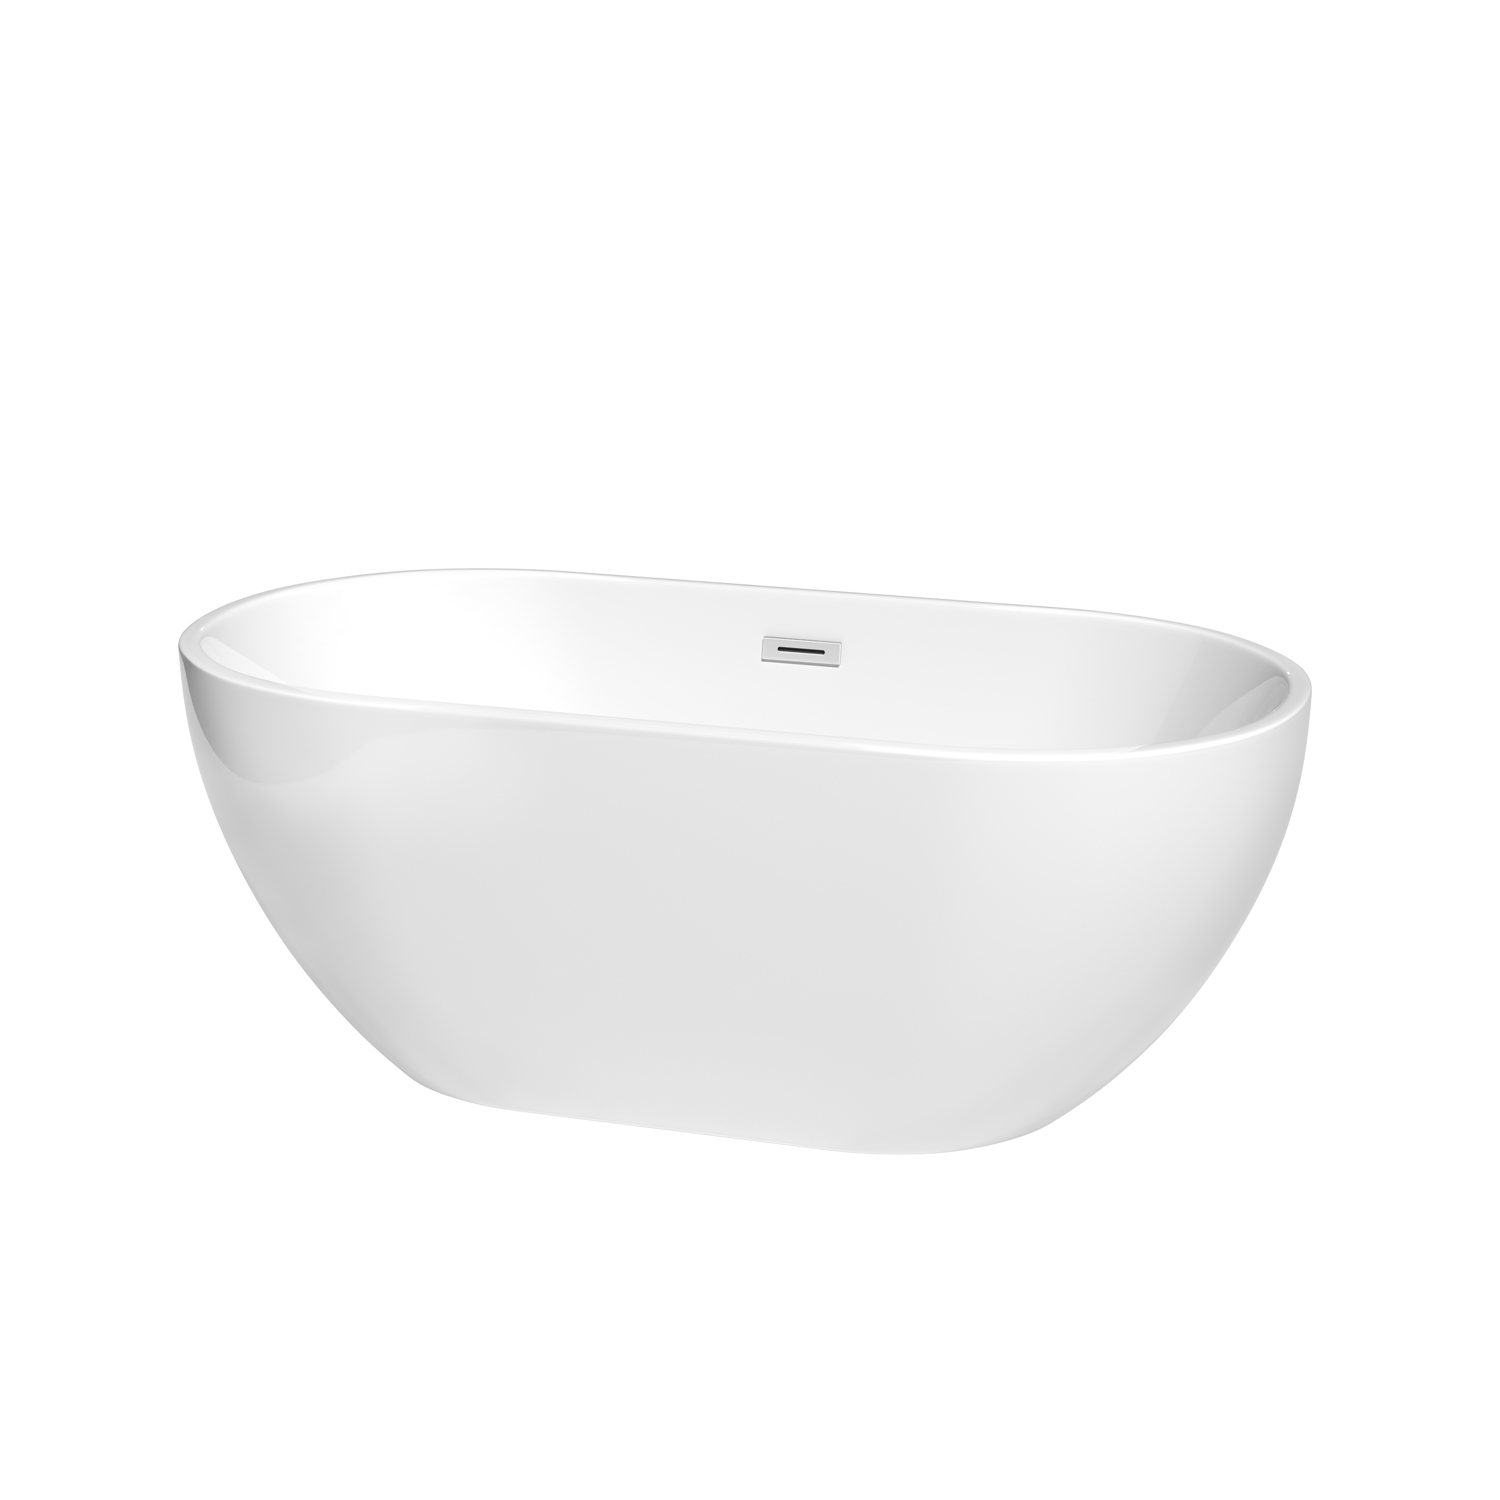 60" Freestanding Bathtub in White with Polished Chrome Drain and Overflow Trim Finish